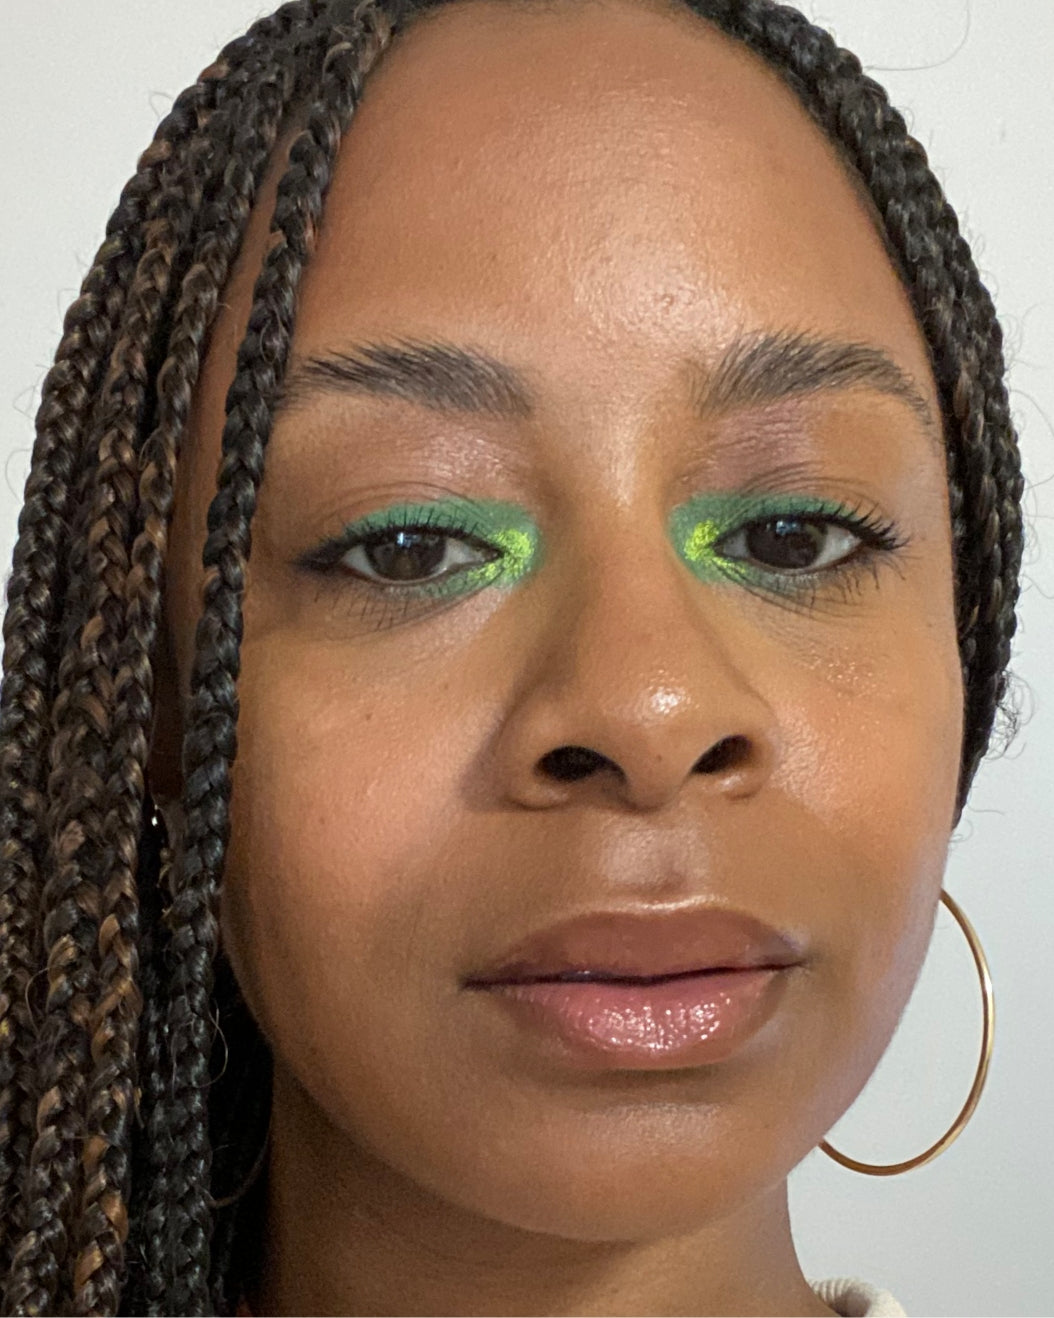 model wears a matcha latte-inspired makeup look with green eyeshadow in the corner of her eyes